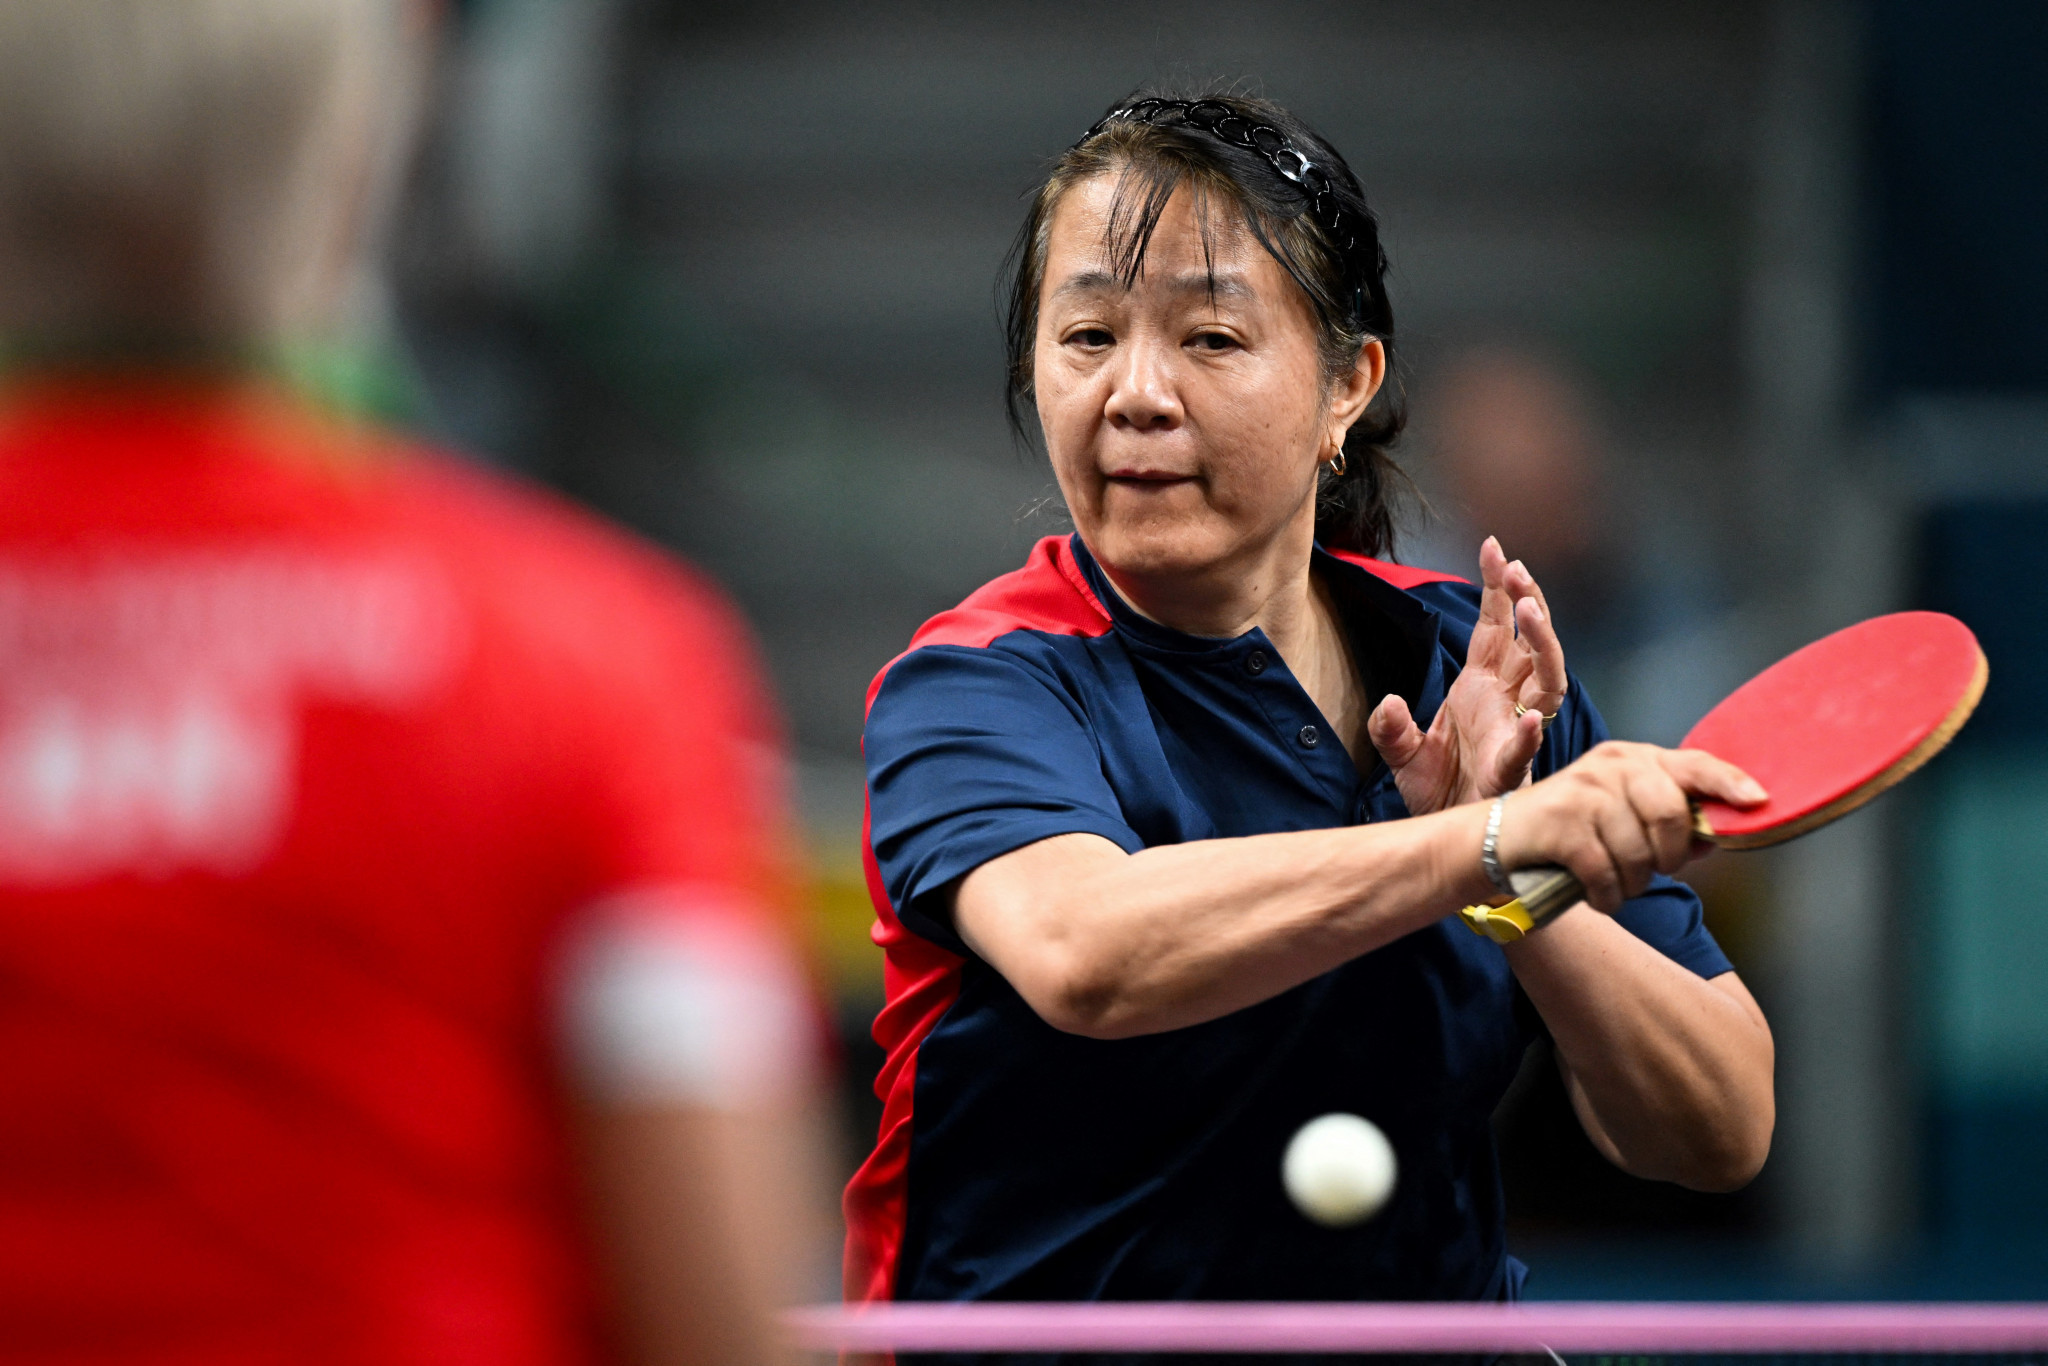 Chile's 58-year-old Zhiying Zeng competes in the women's table tennis singles at the Paris 2024 Olympic Games. GETTY IMAGES.